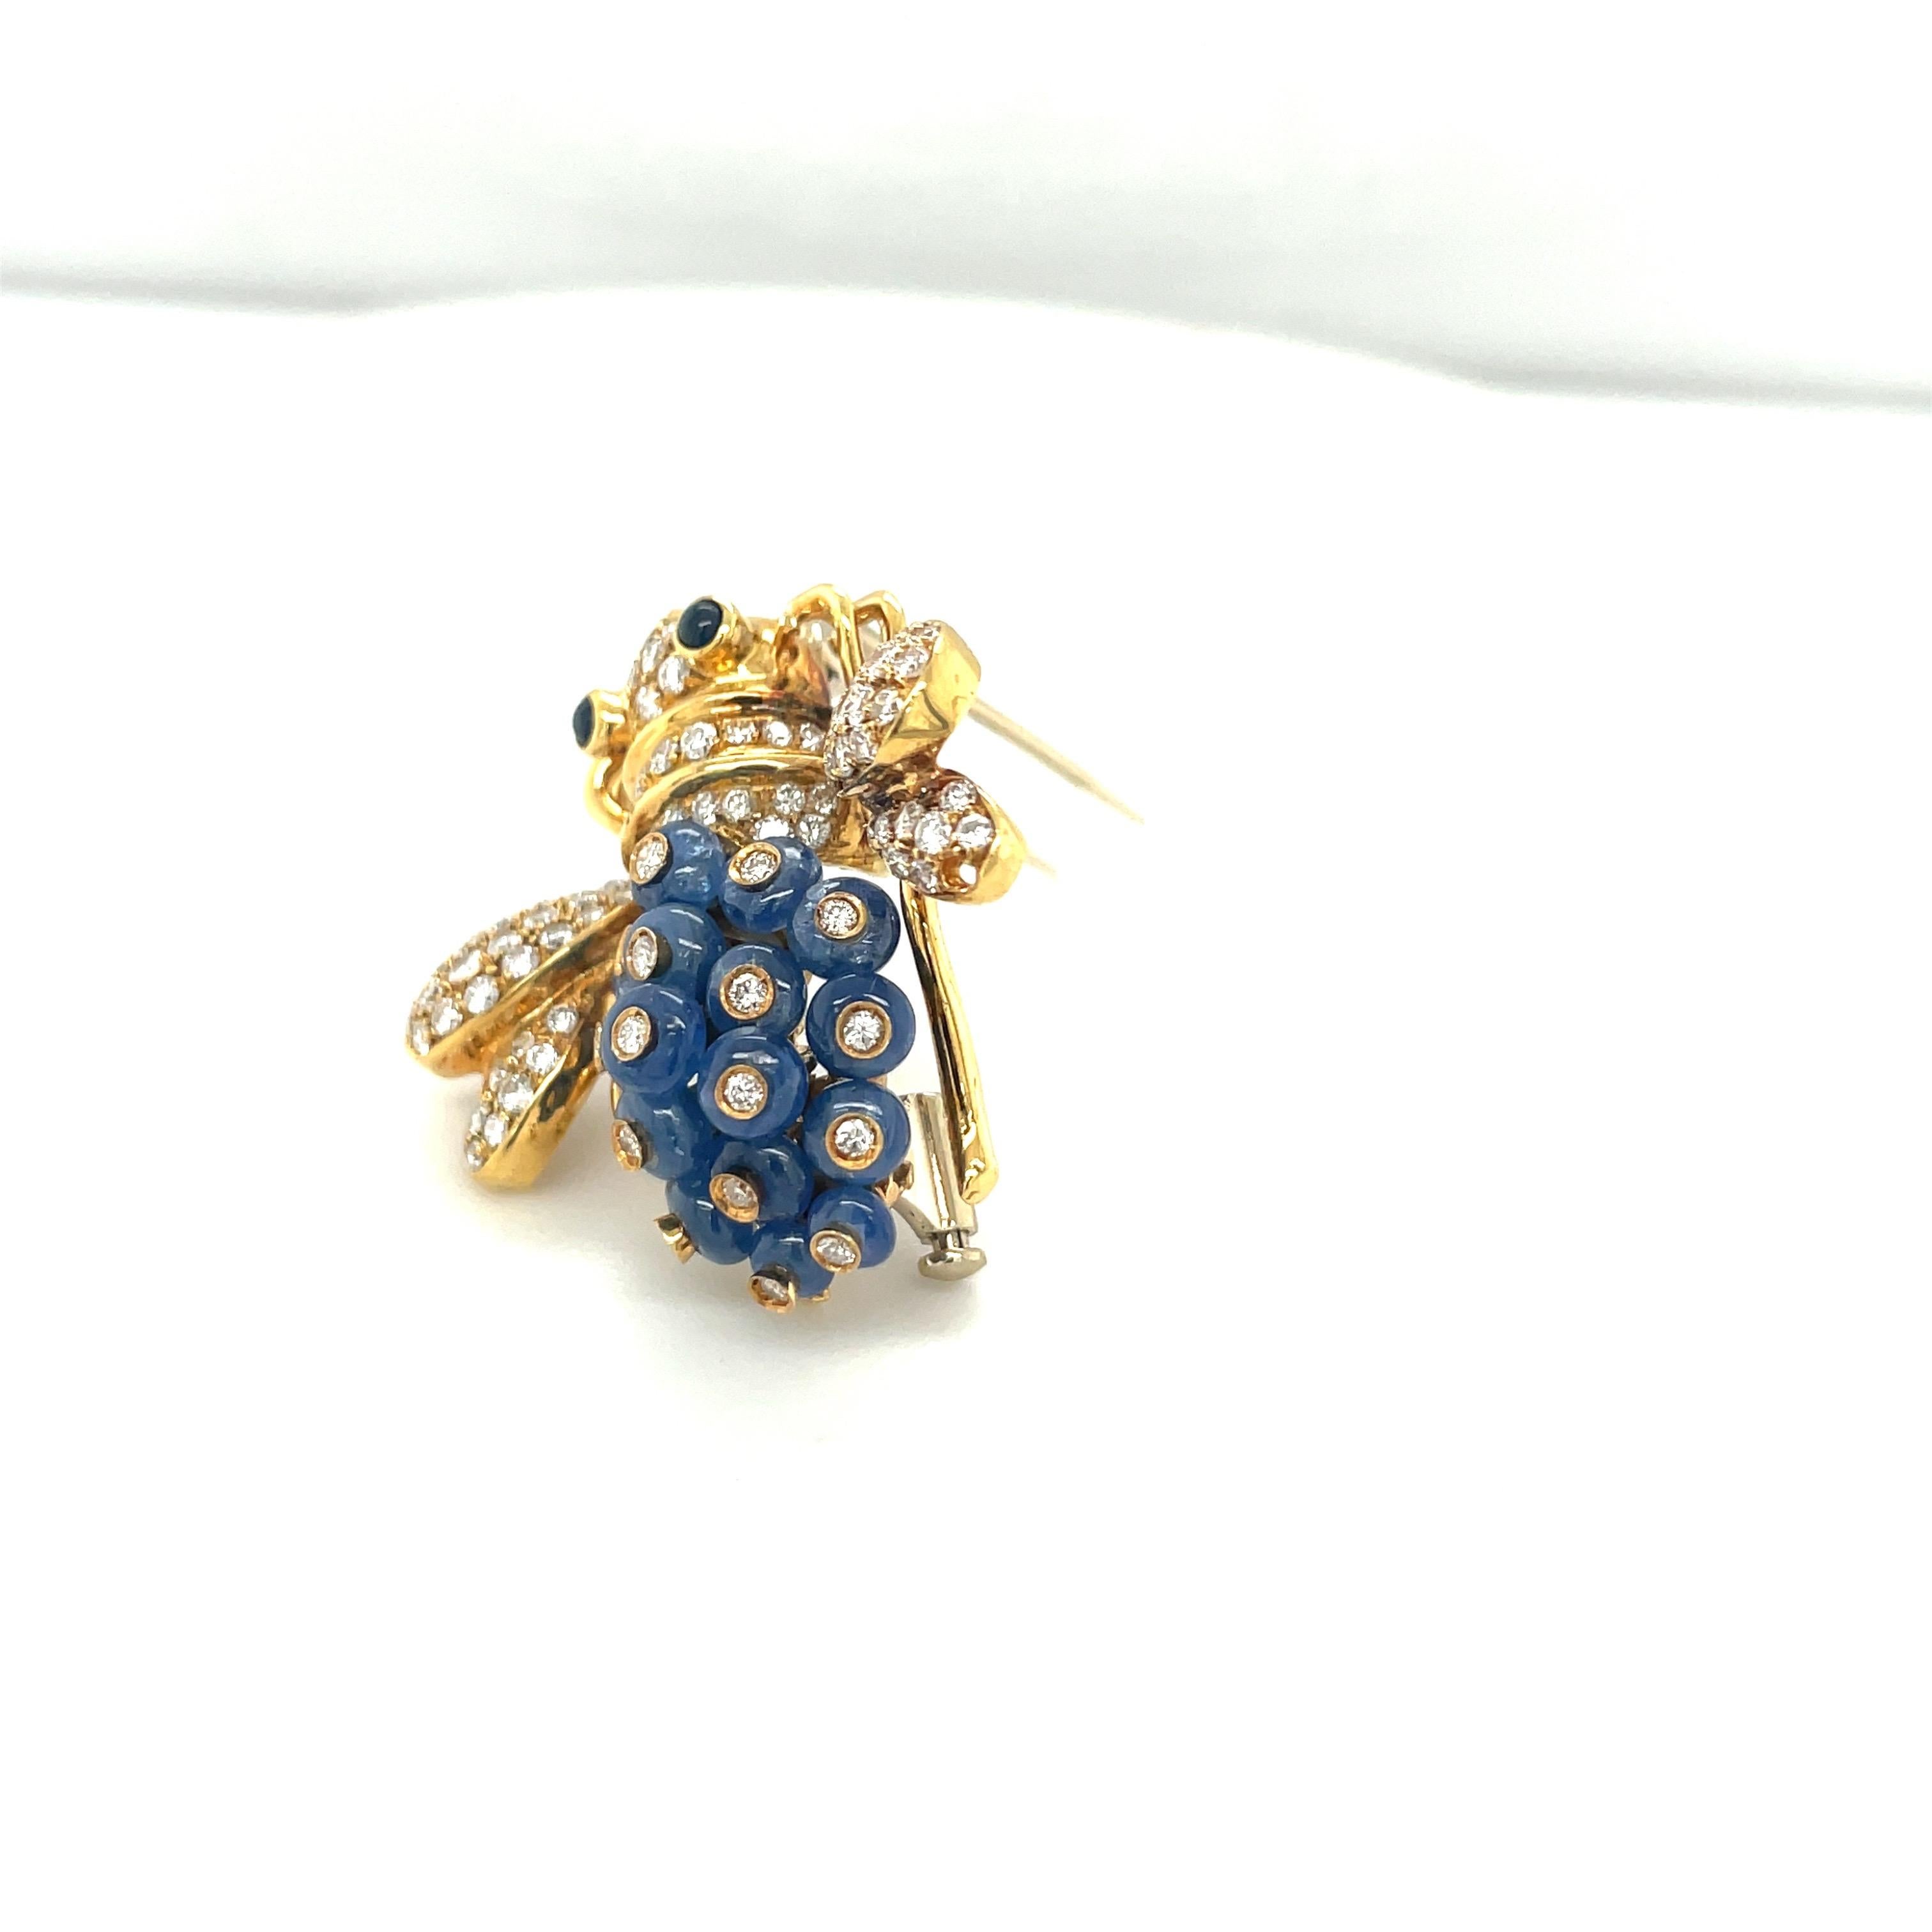 The house of Giovane has forged its name with exquisite jewelry made in one of Italy’s oldest and most esteemed workshops.
This adorable bee brooch is the perfect example of their whimsical yet classical workmanship.
The 18 karat yellow gold bee is